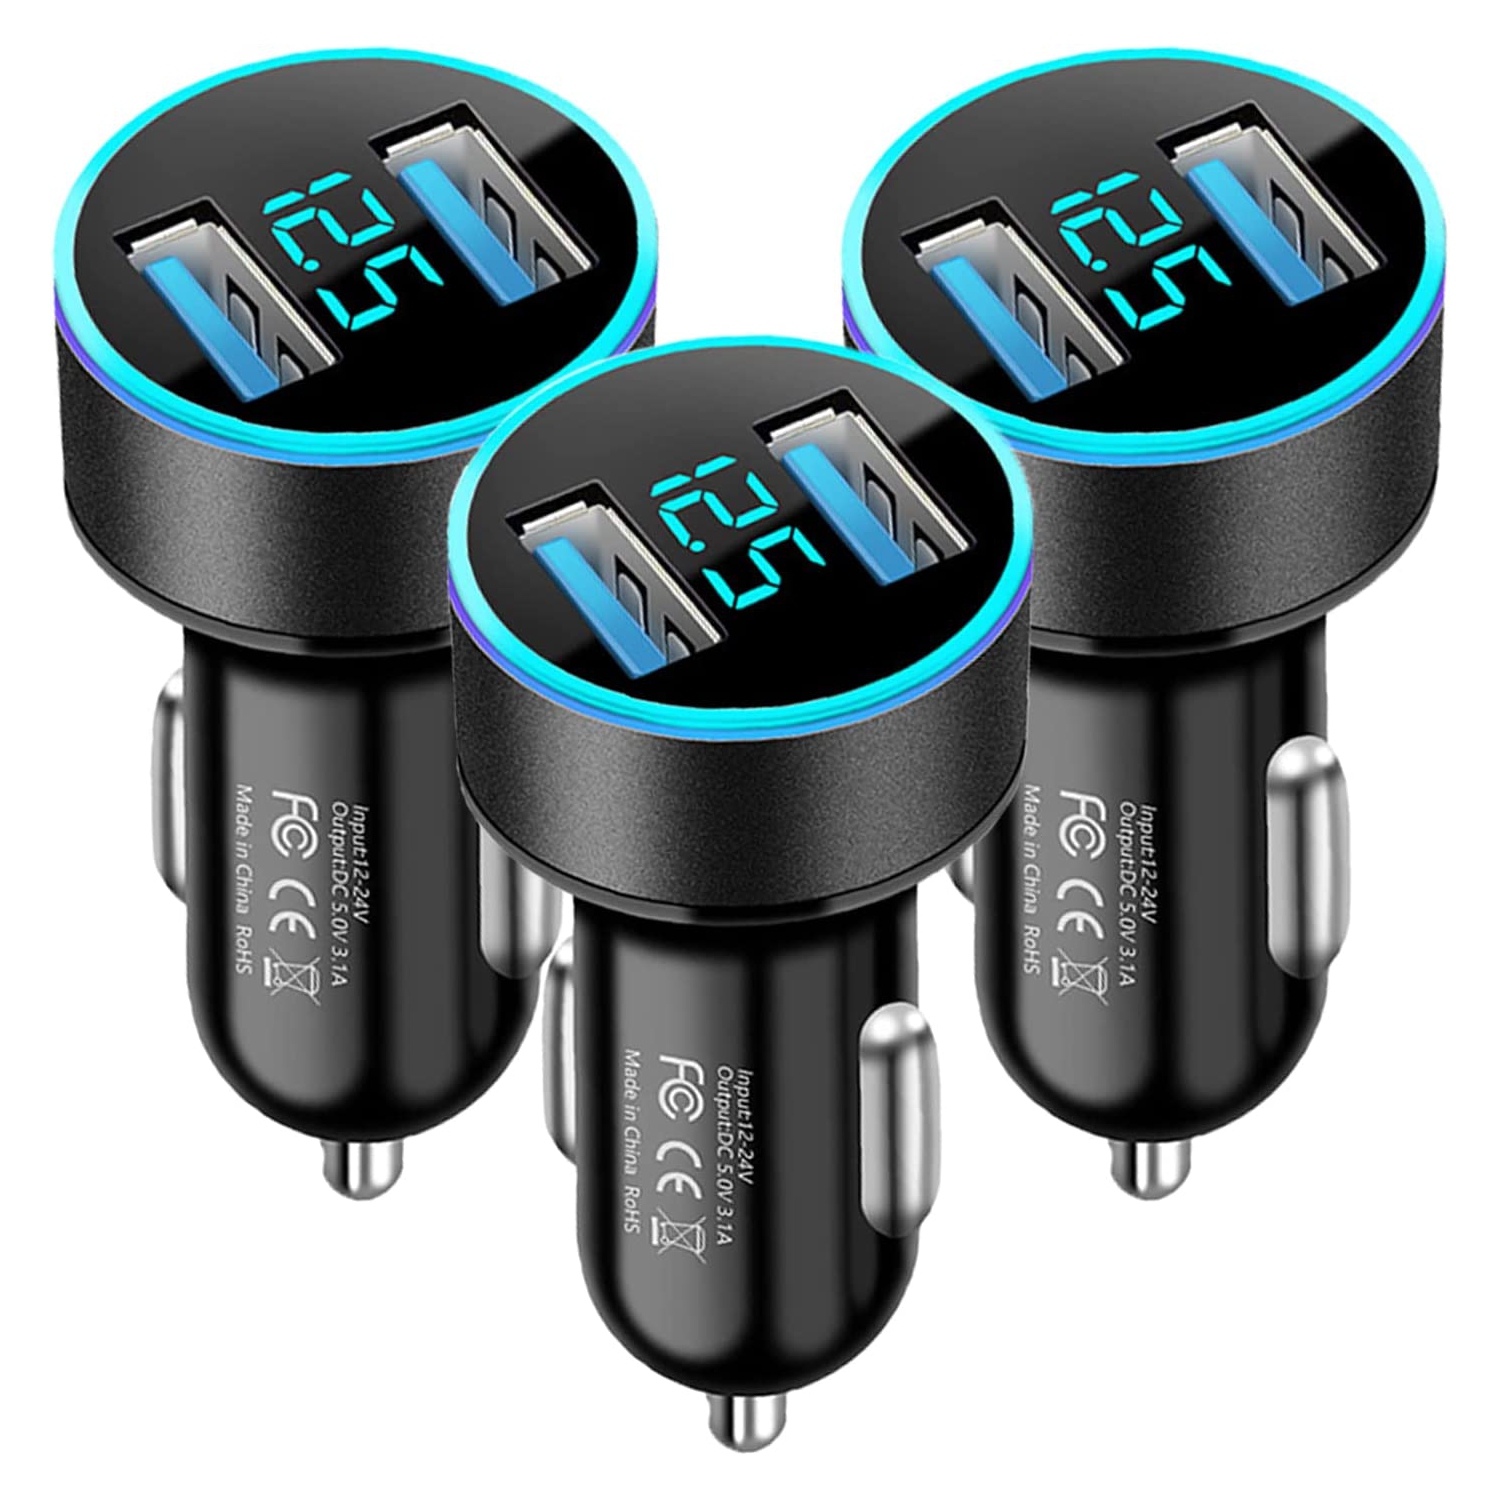 3 Pack USB Car Charger, Fast USB Charger Car, ED Display Voltage Detector 3.1A Fast Charging Adapter Compatible for iPhone 12/11 / X / 8S / 7, Samsung Galaxy S10 S9,S8,S7, LG, Huaw